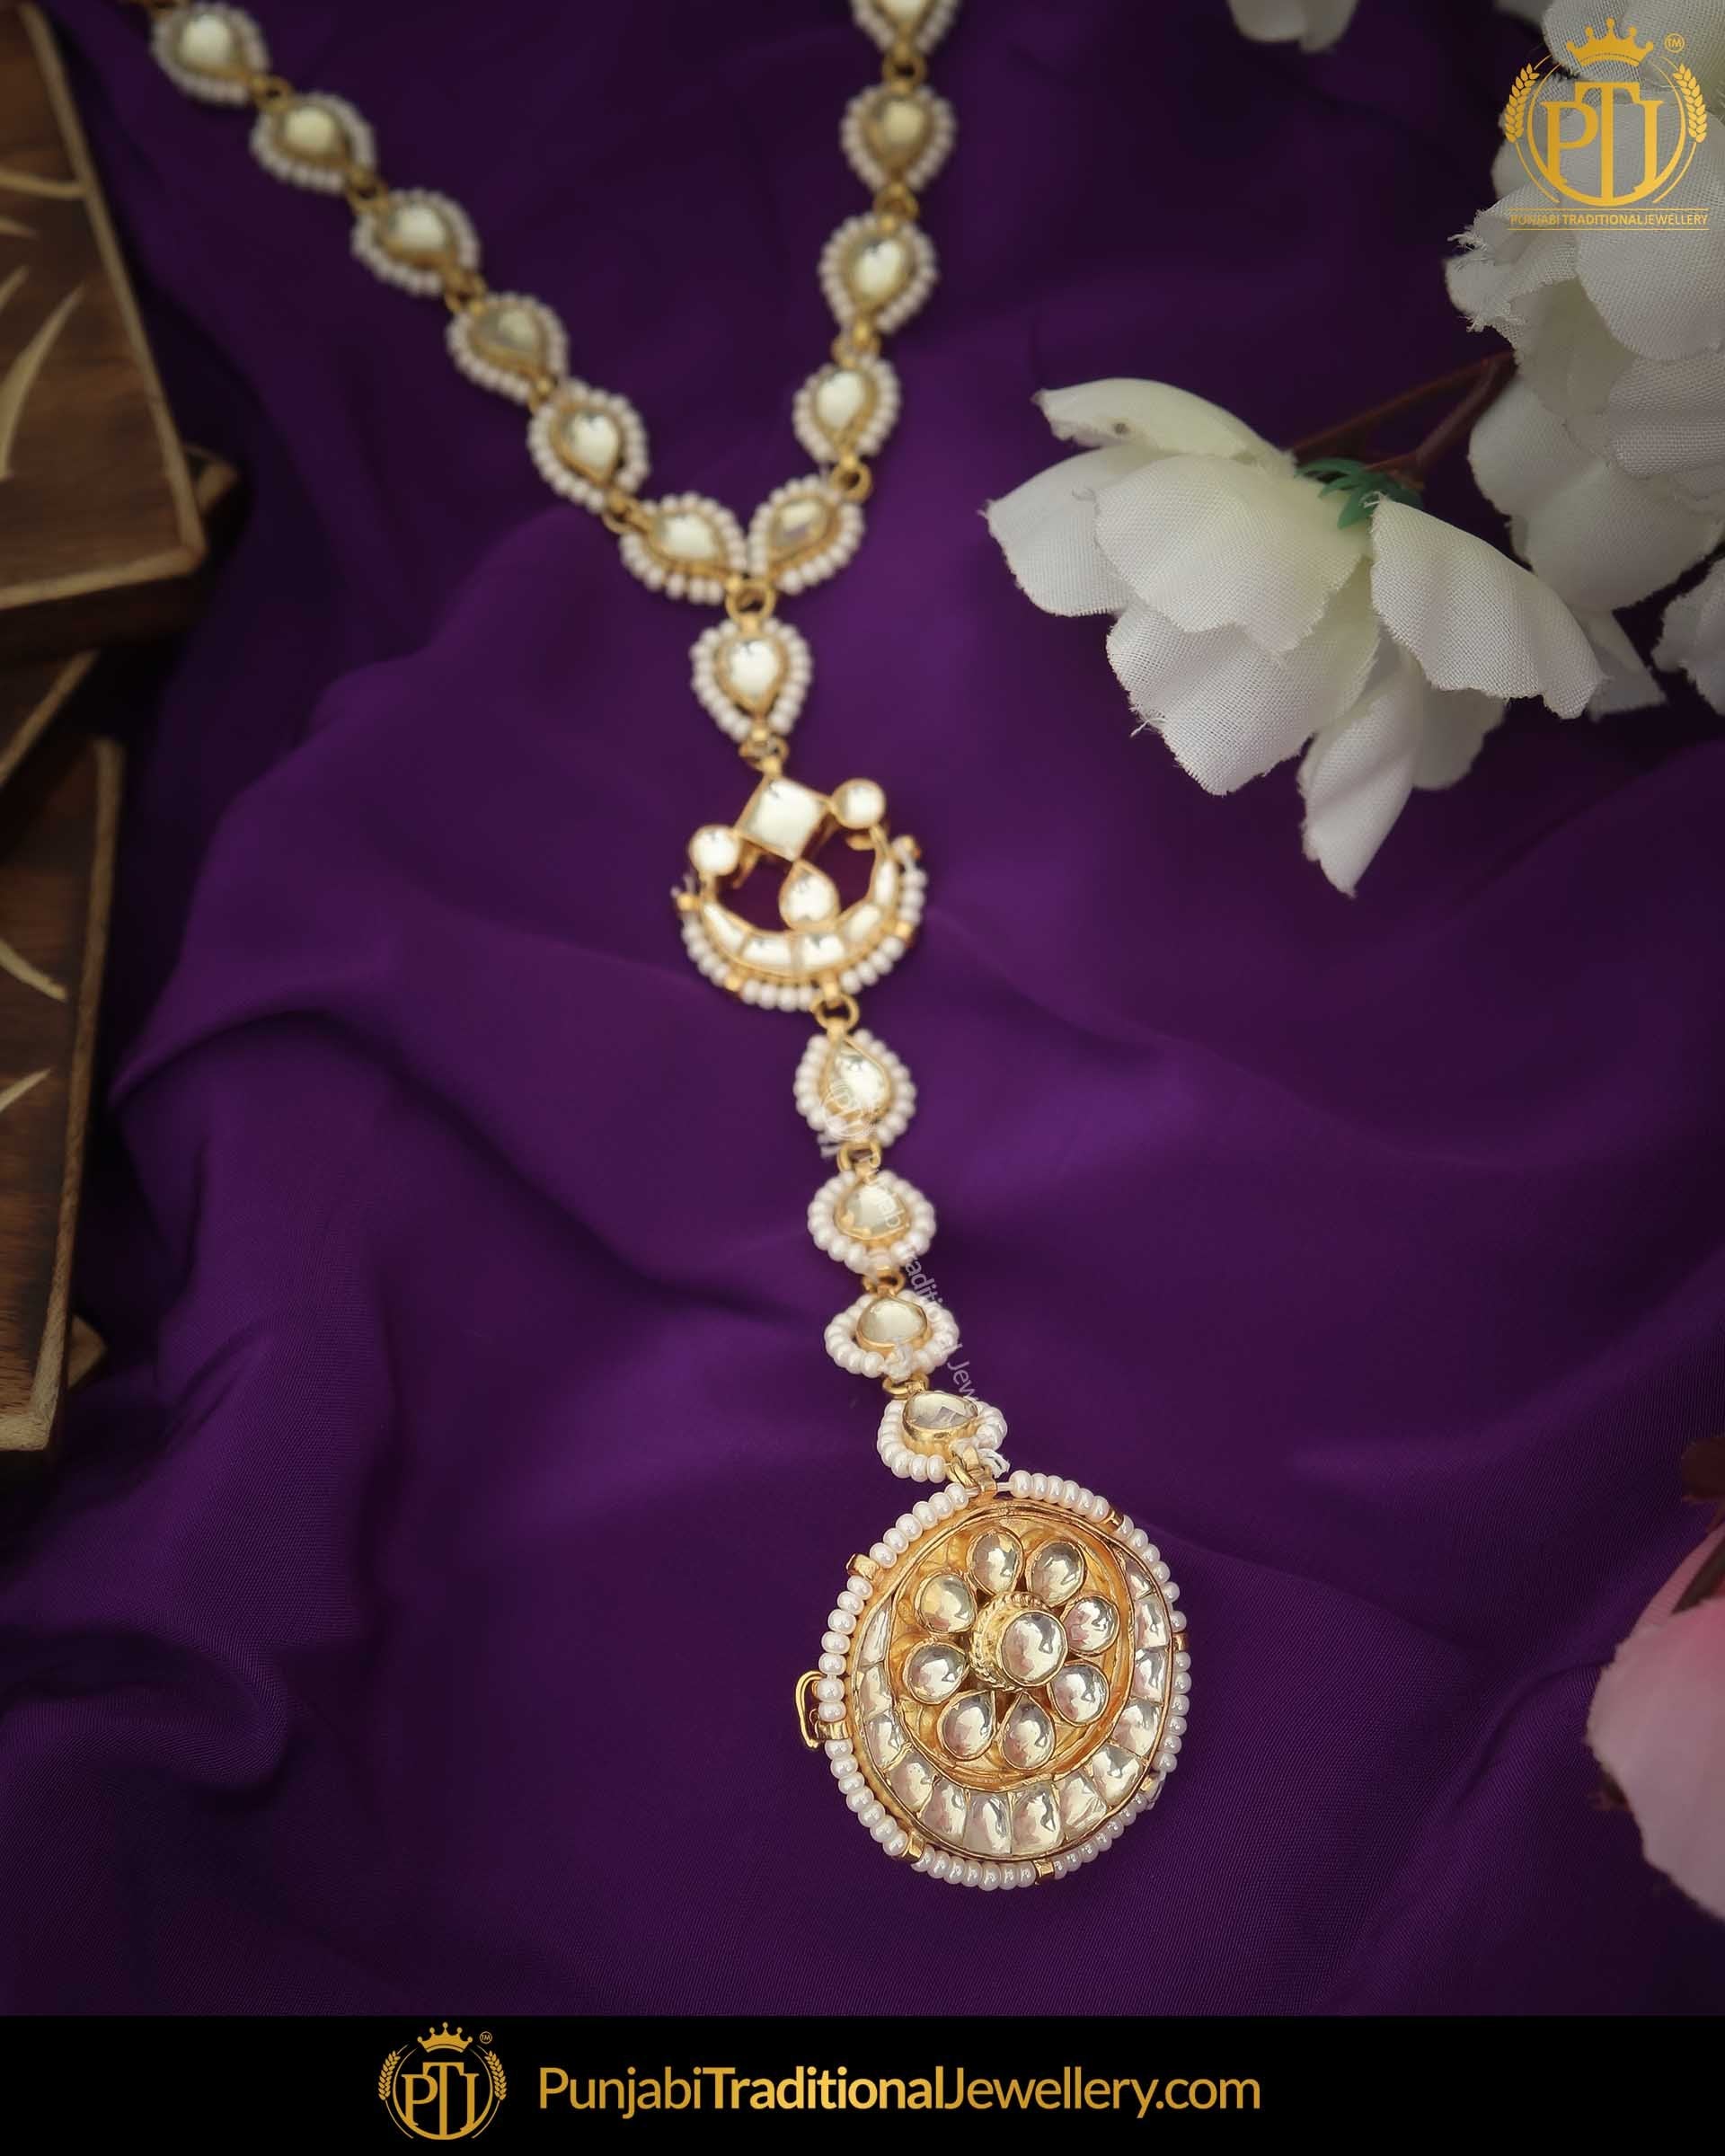 Gold Finished Kundan Pair Hand Pieces | Punjabi Traditional Jewellery Exclusive